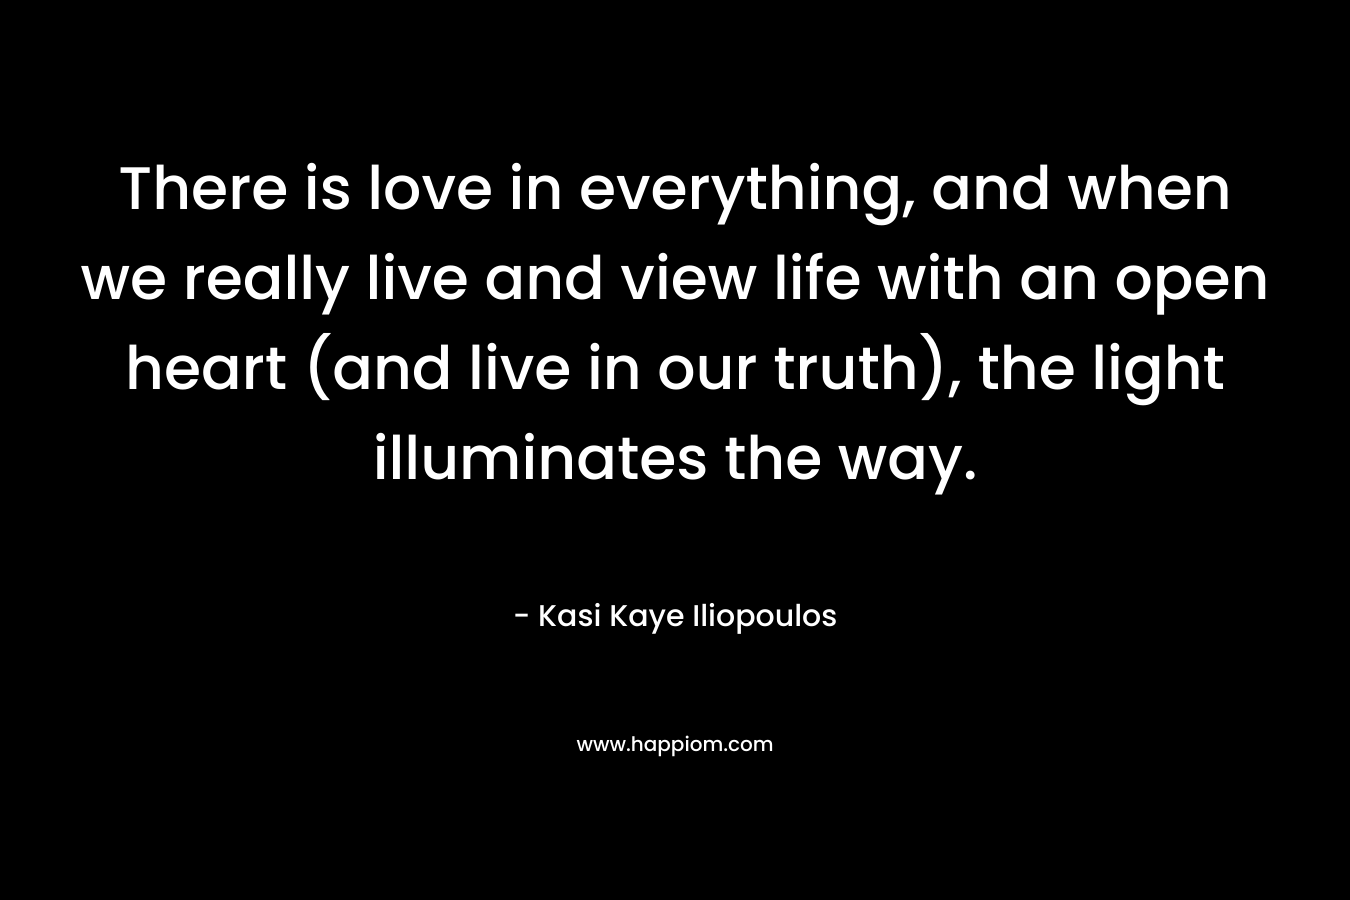 There is love in everything, and when we really live and view life with an open heart (and live in our truth), the light illuminates the way. – Kasi Kaye Iliopoulos